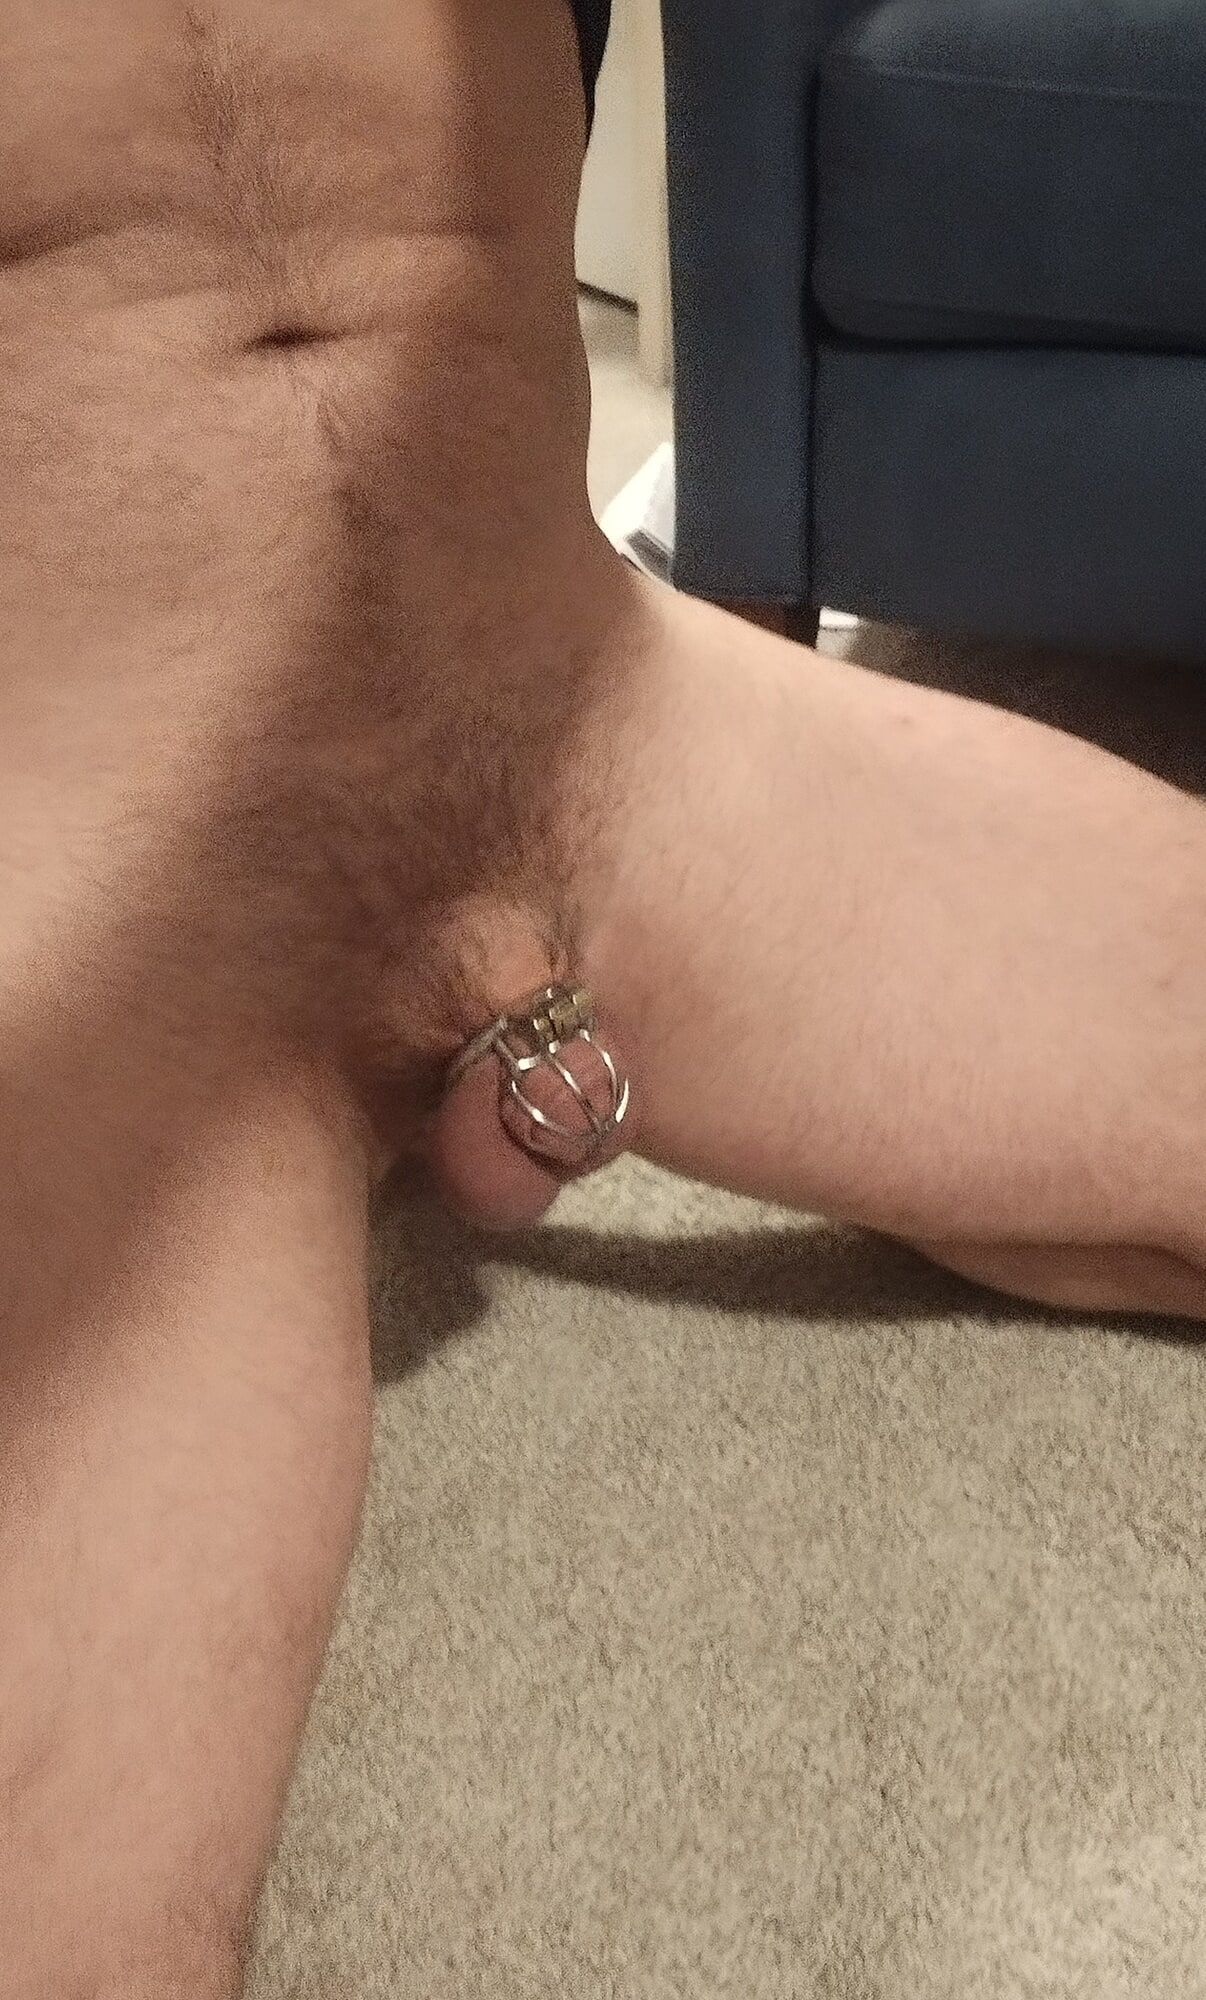 Tiny cock locked up in cock cage #2